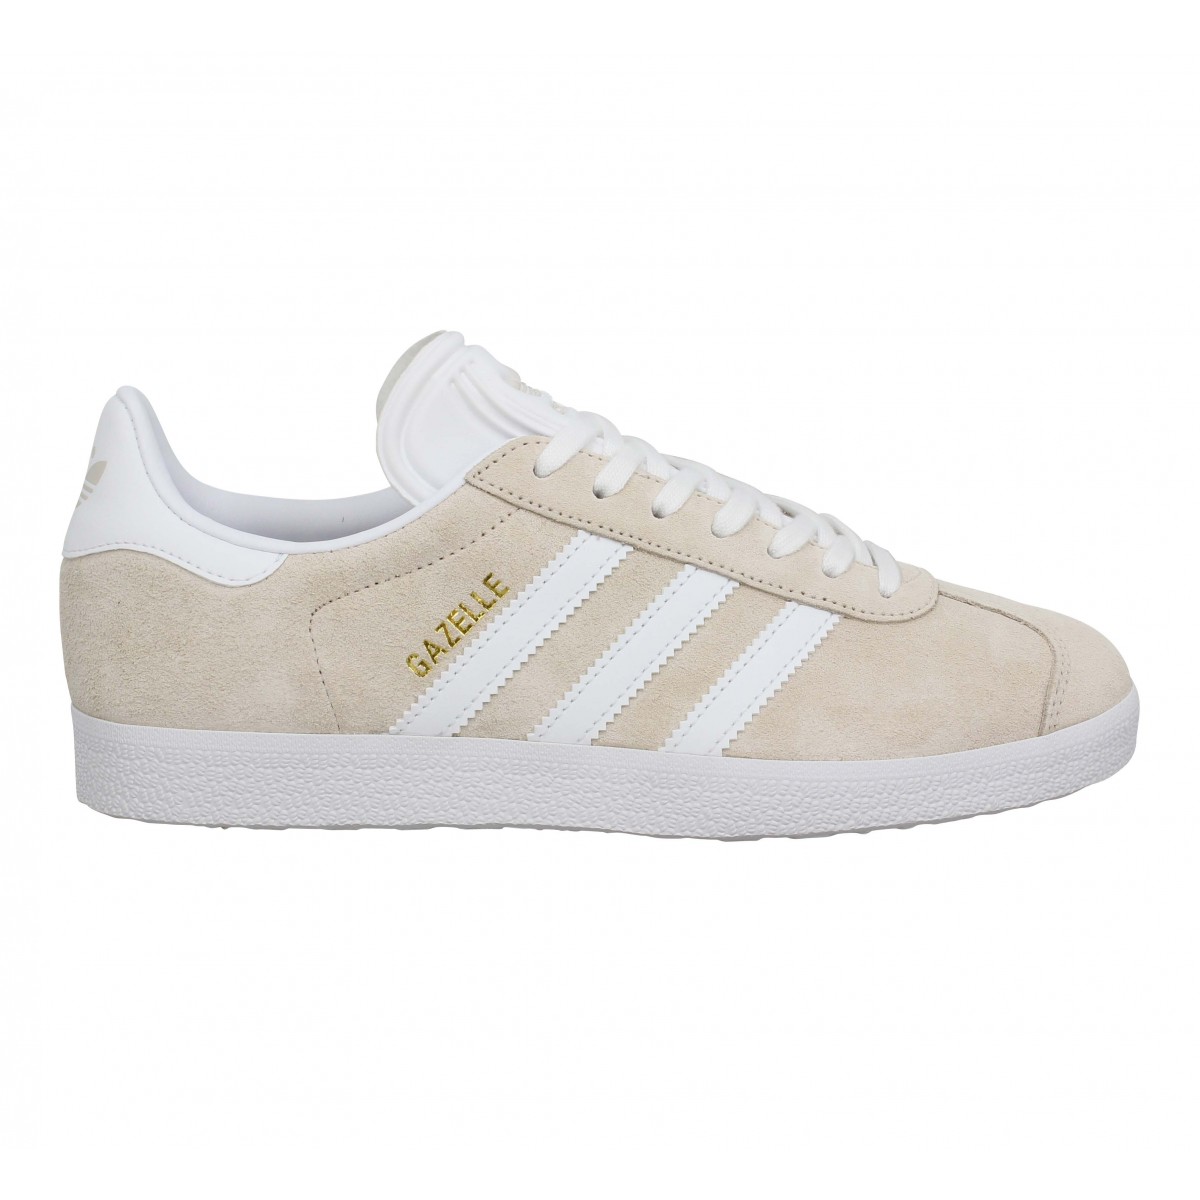 Chaussures Adidas gazelle velours lin femme homme | Fanny chaussures